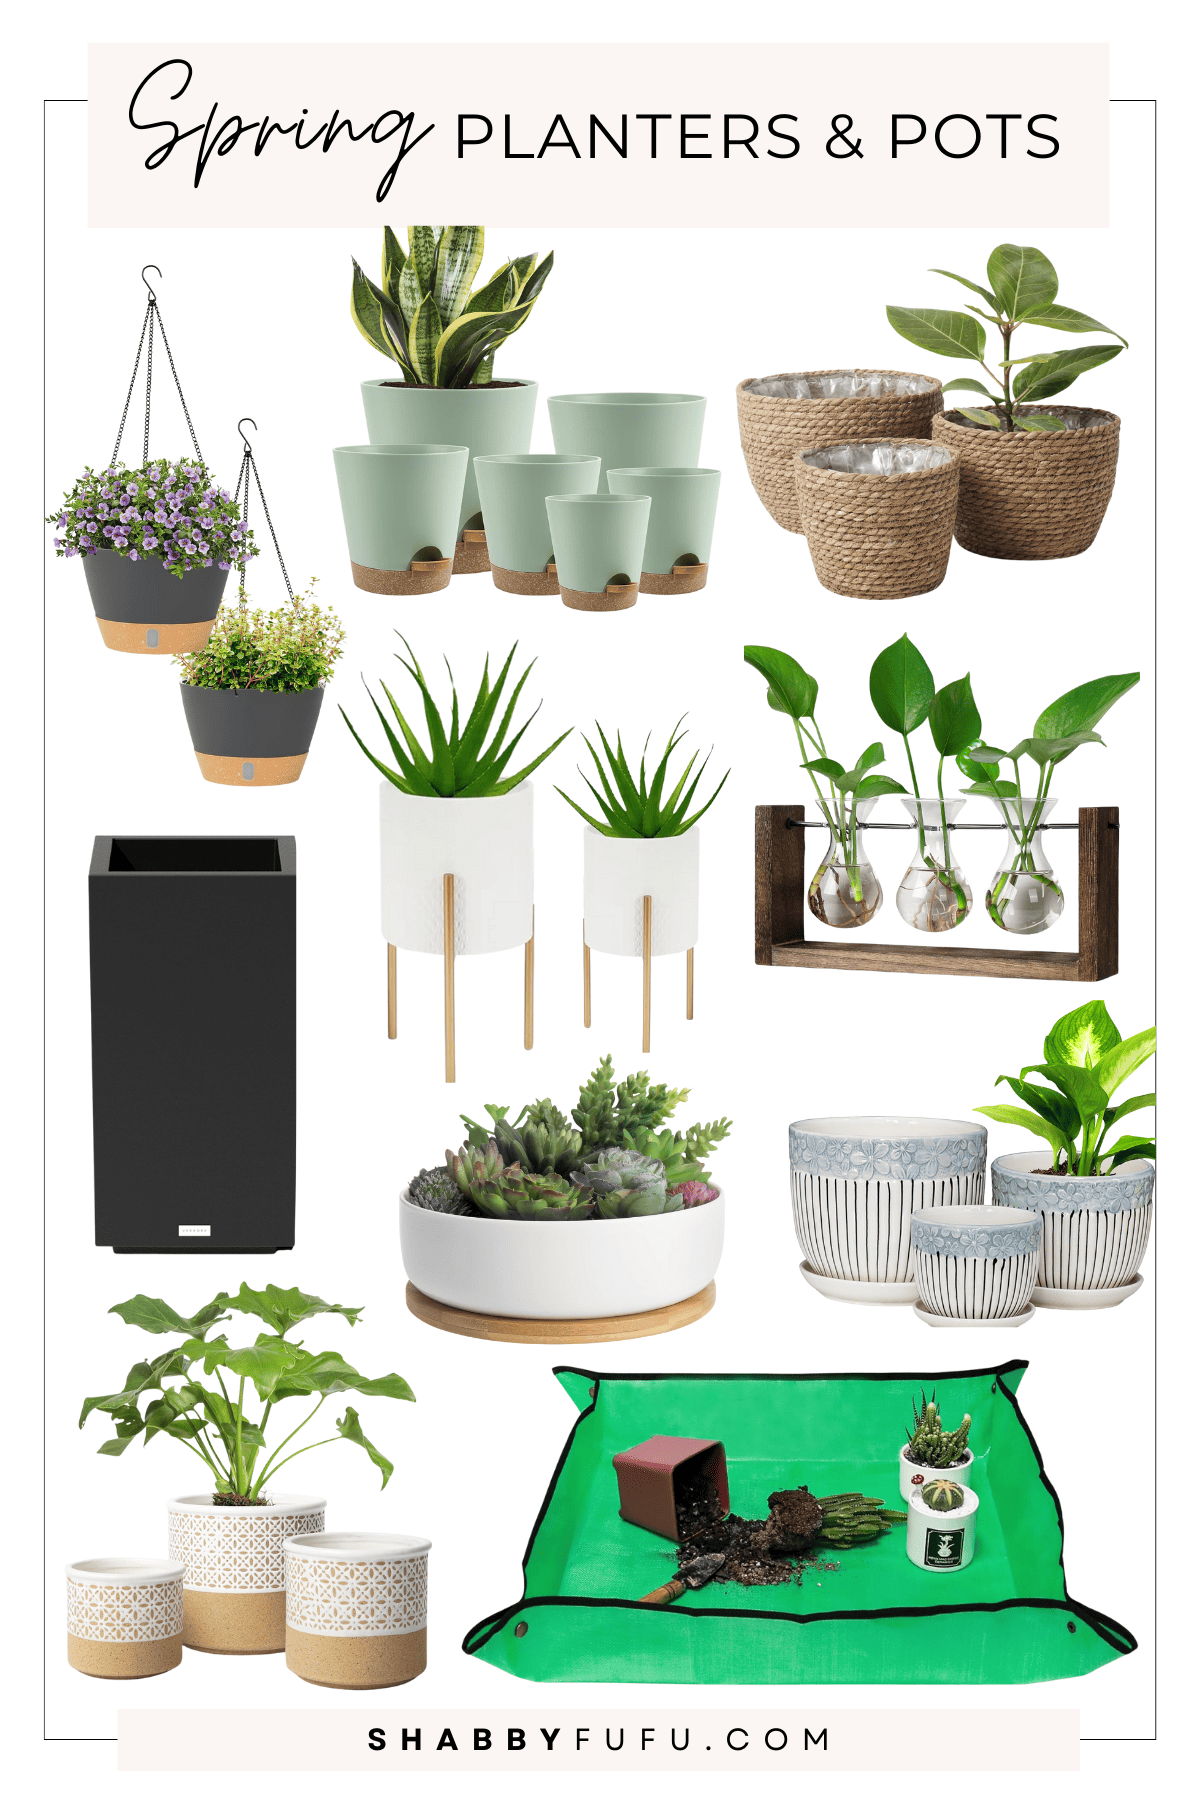 Decorative Pinterest image featuring a collage of products for indoor plants